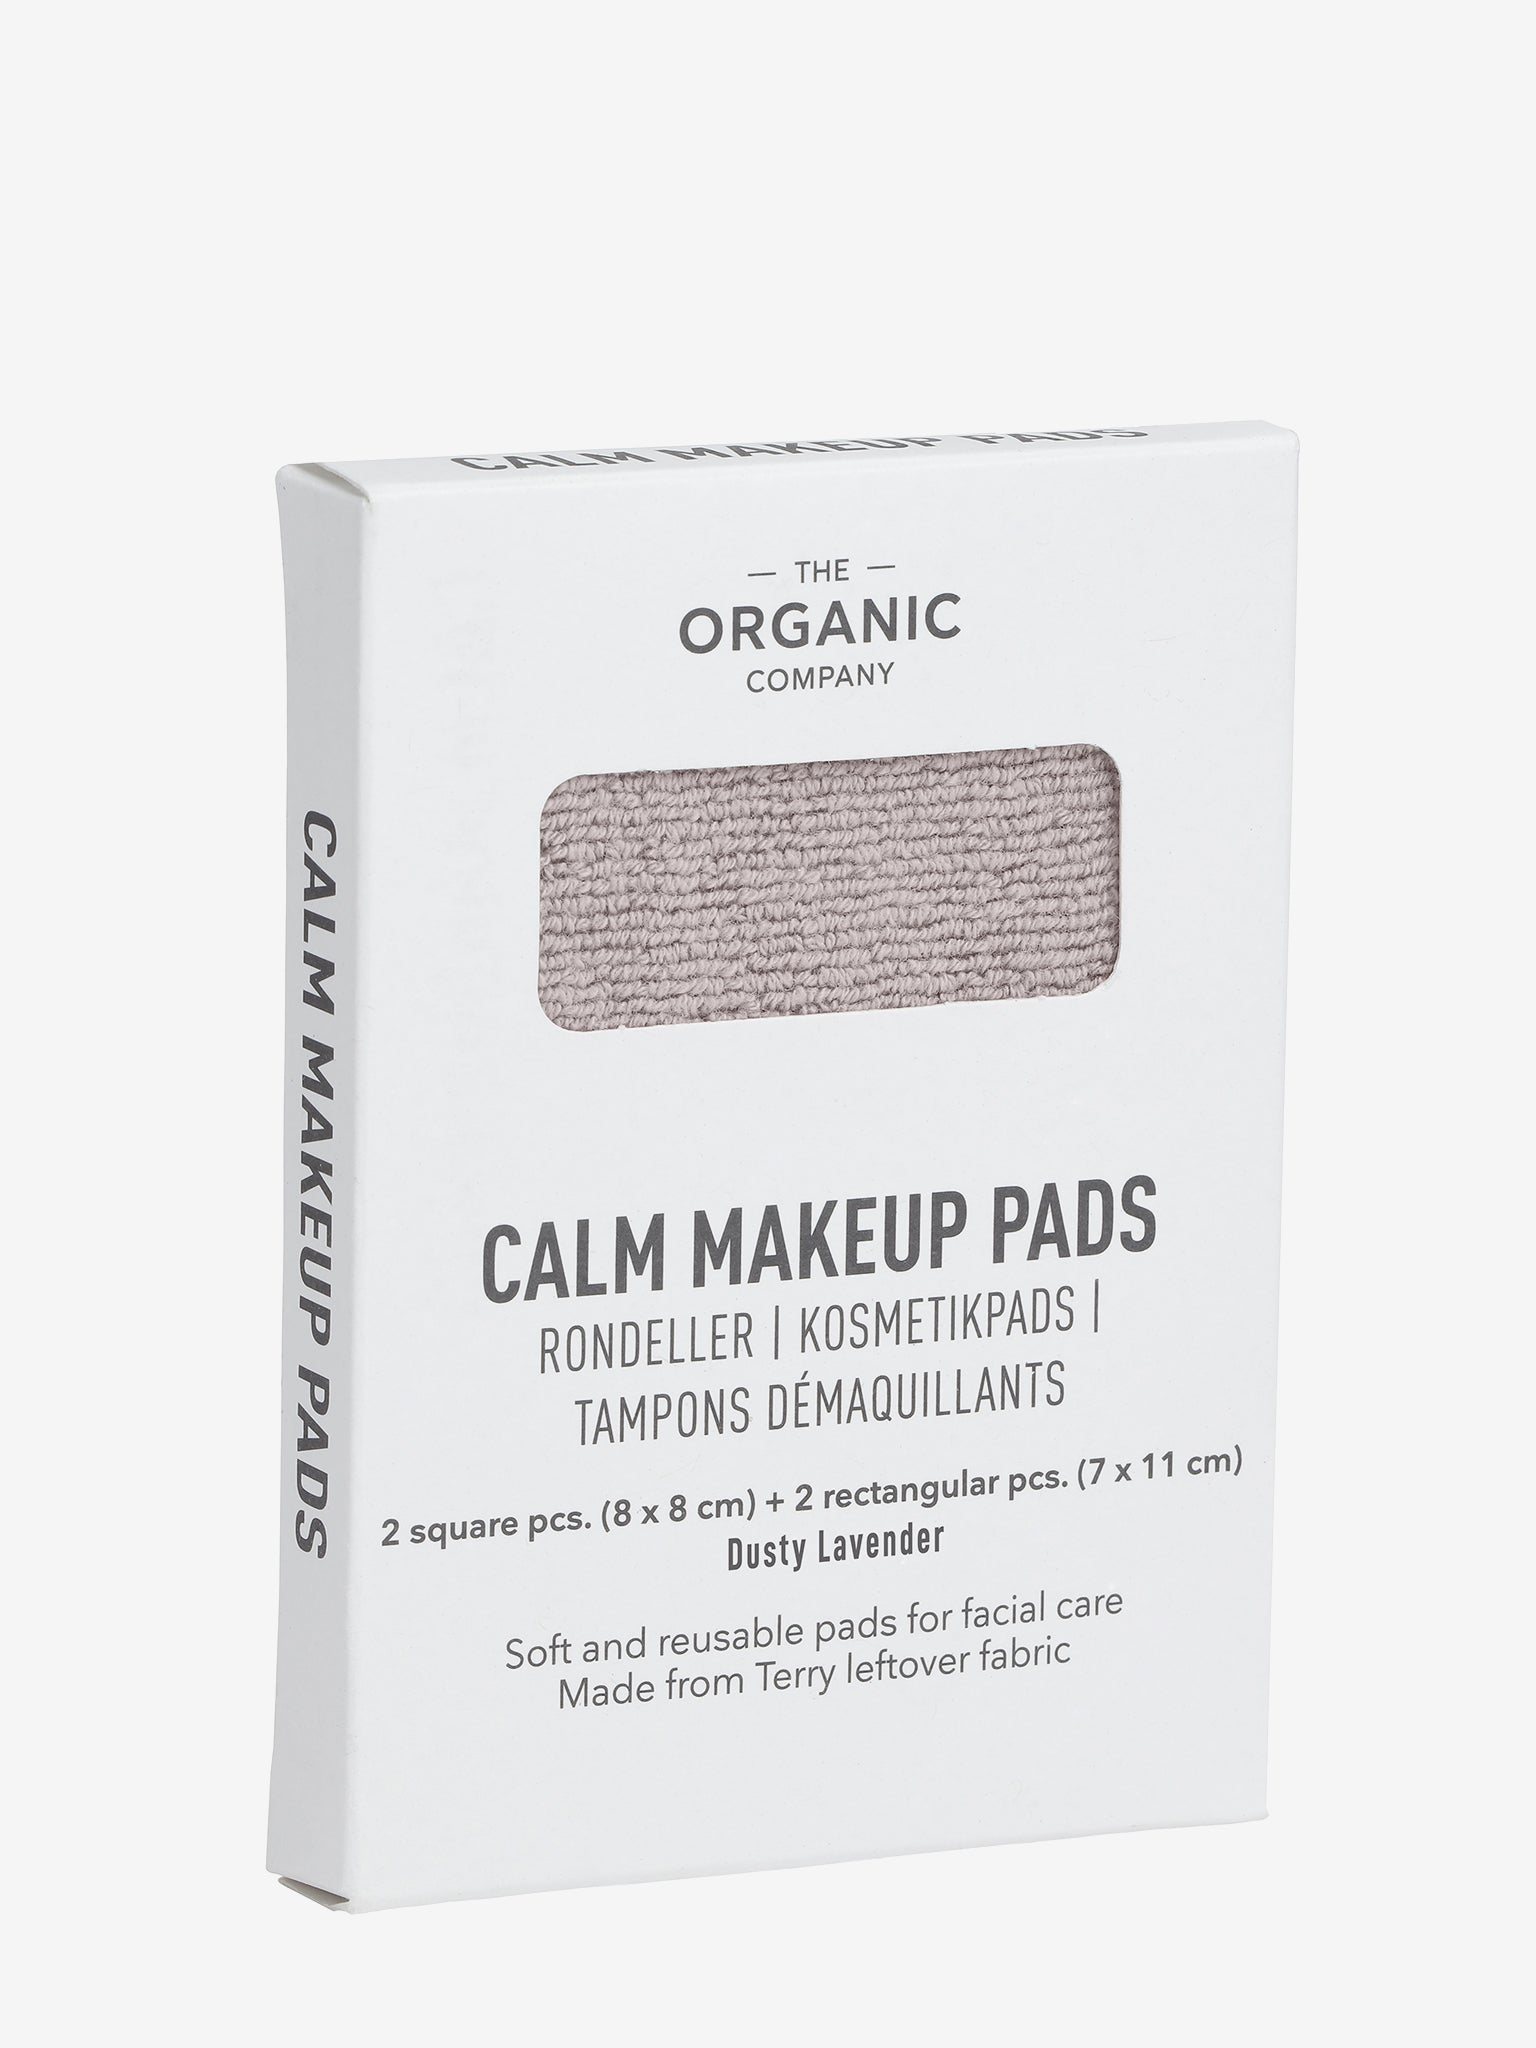 The Organic Company Calm Makeup Pads - set of 4 - Dusty Lavender